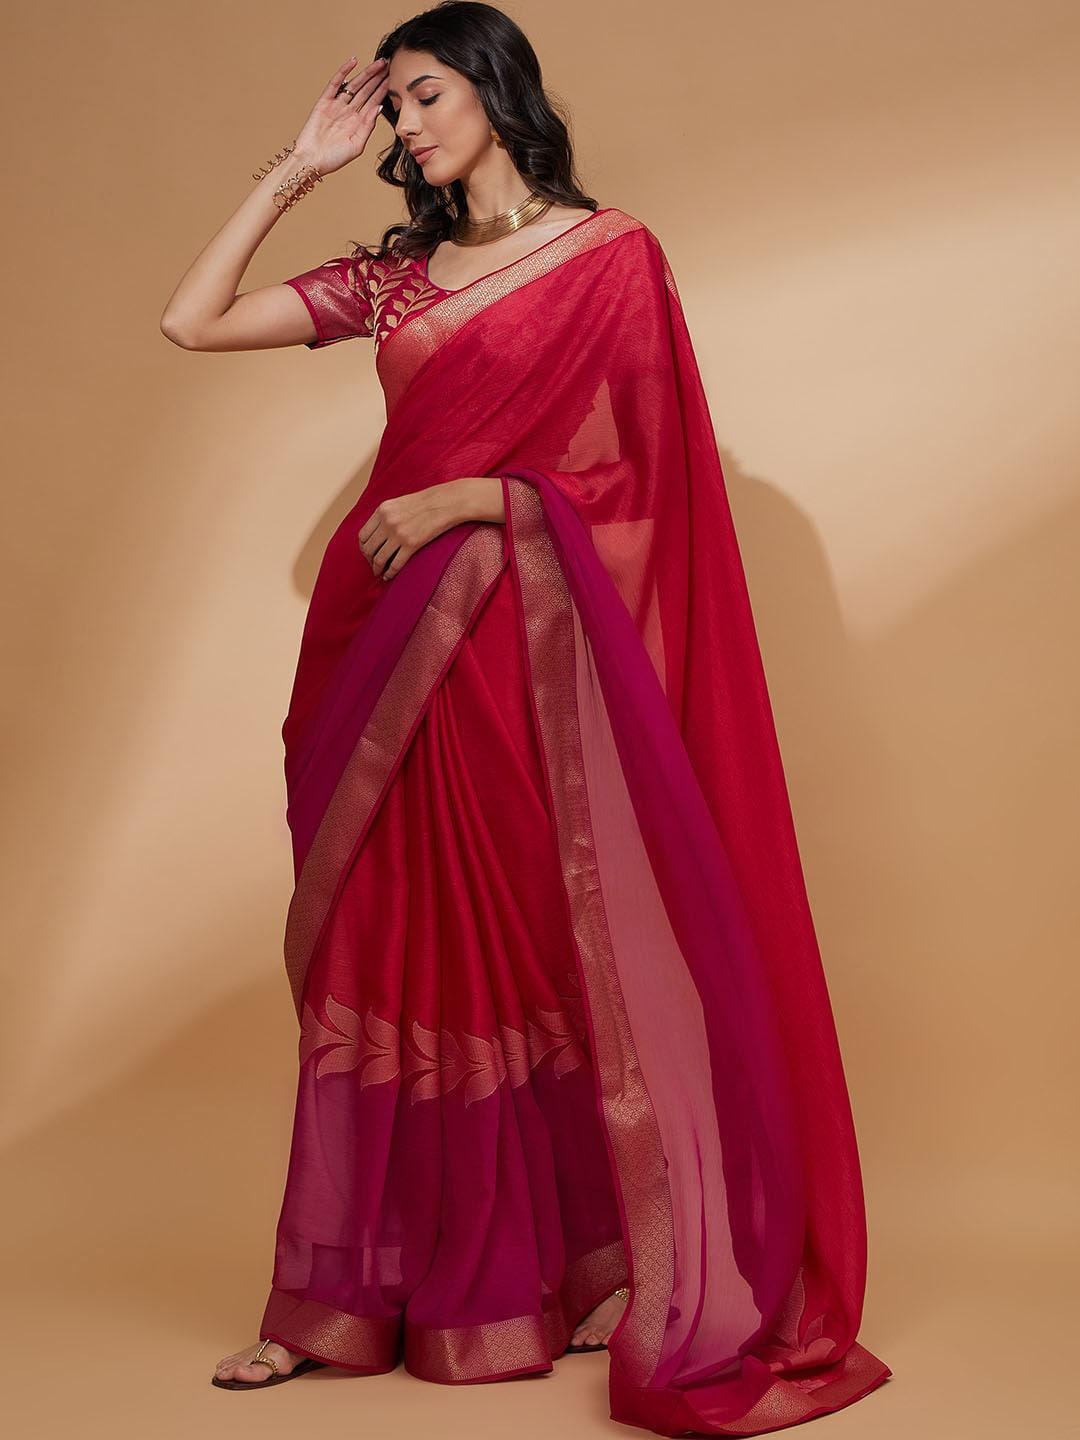 all about you Pink Floral Woven Design Zari Detailed Pure Chiffon Saree